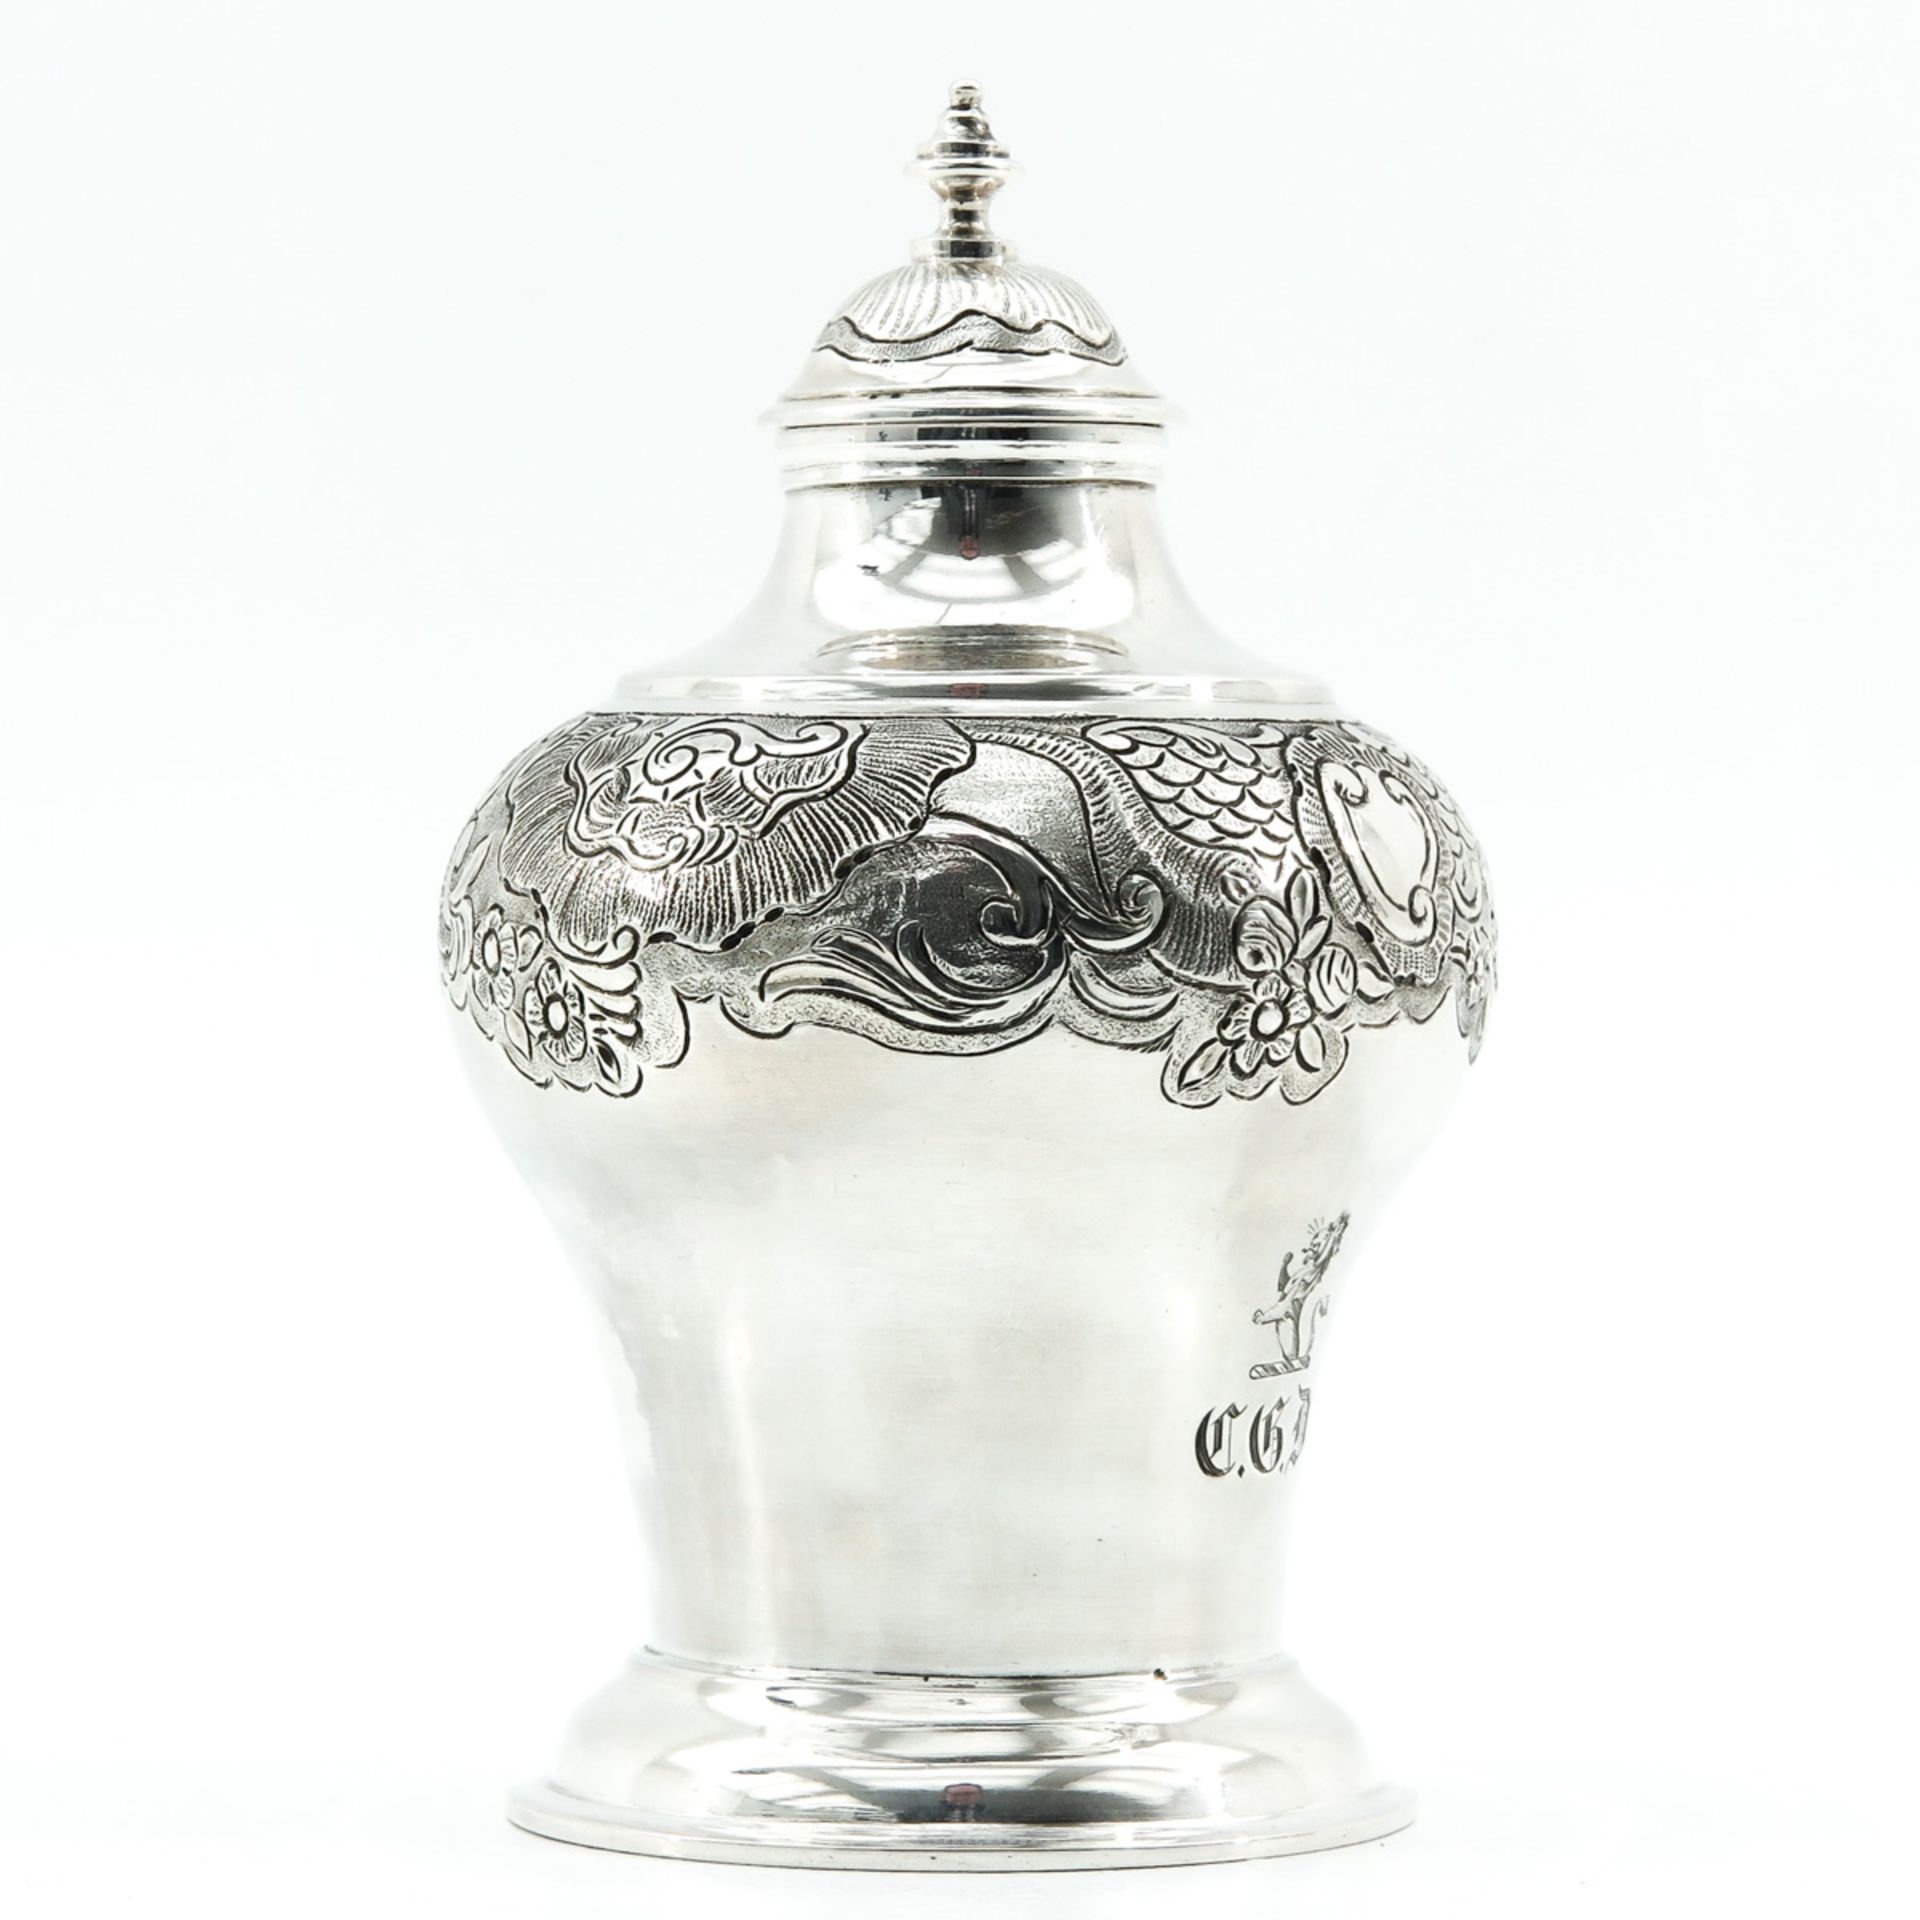 A Silver Tea Caddy - Image 4 of 10